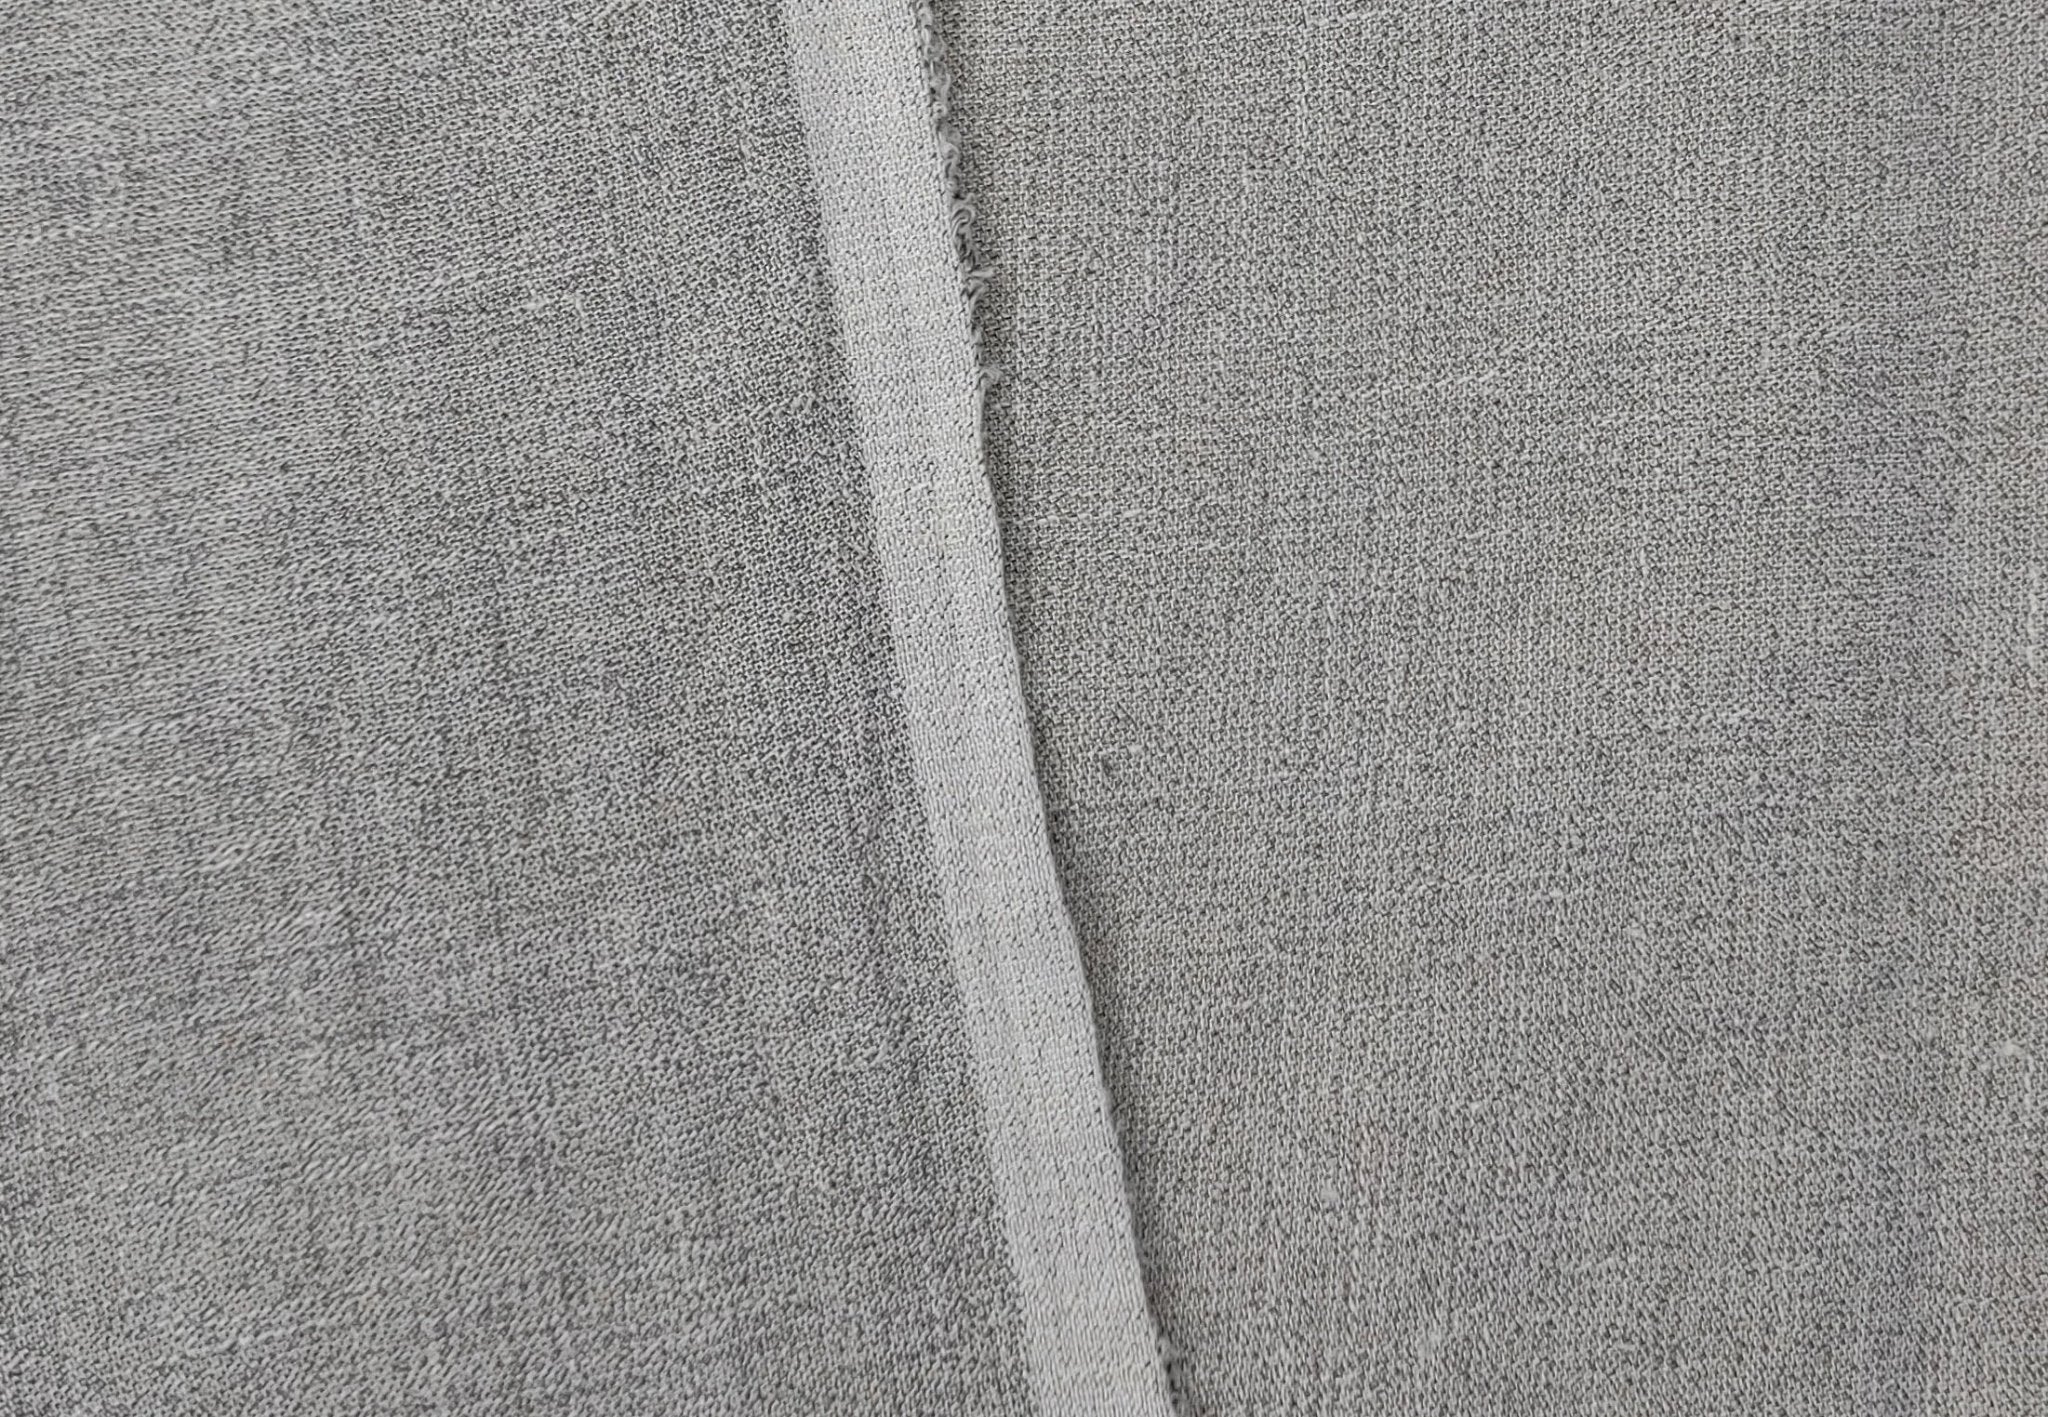 Subtle Sophistication: Linen Polyester Mixed Fabric with Grey Plaid 6002 - The Linen Lab - Grey